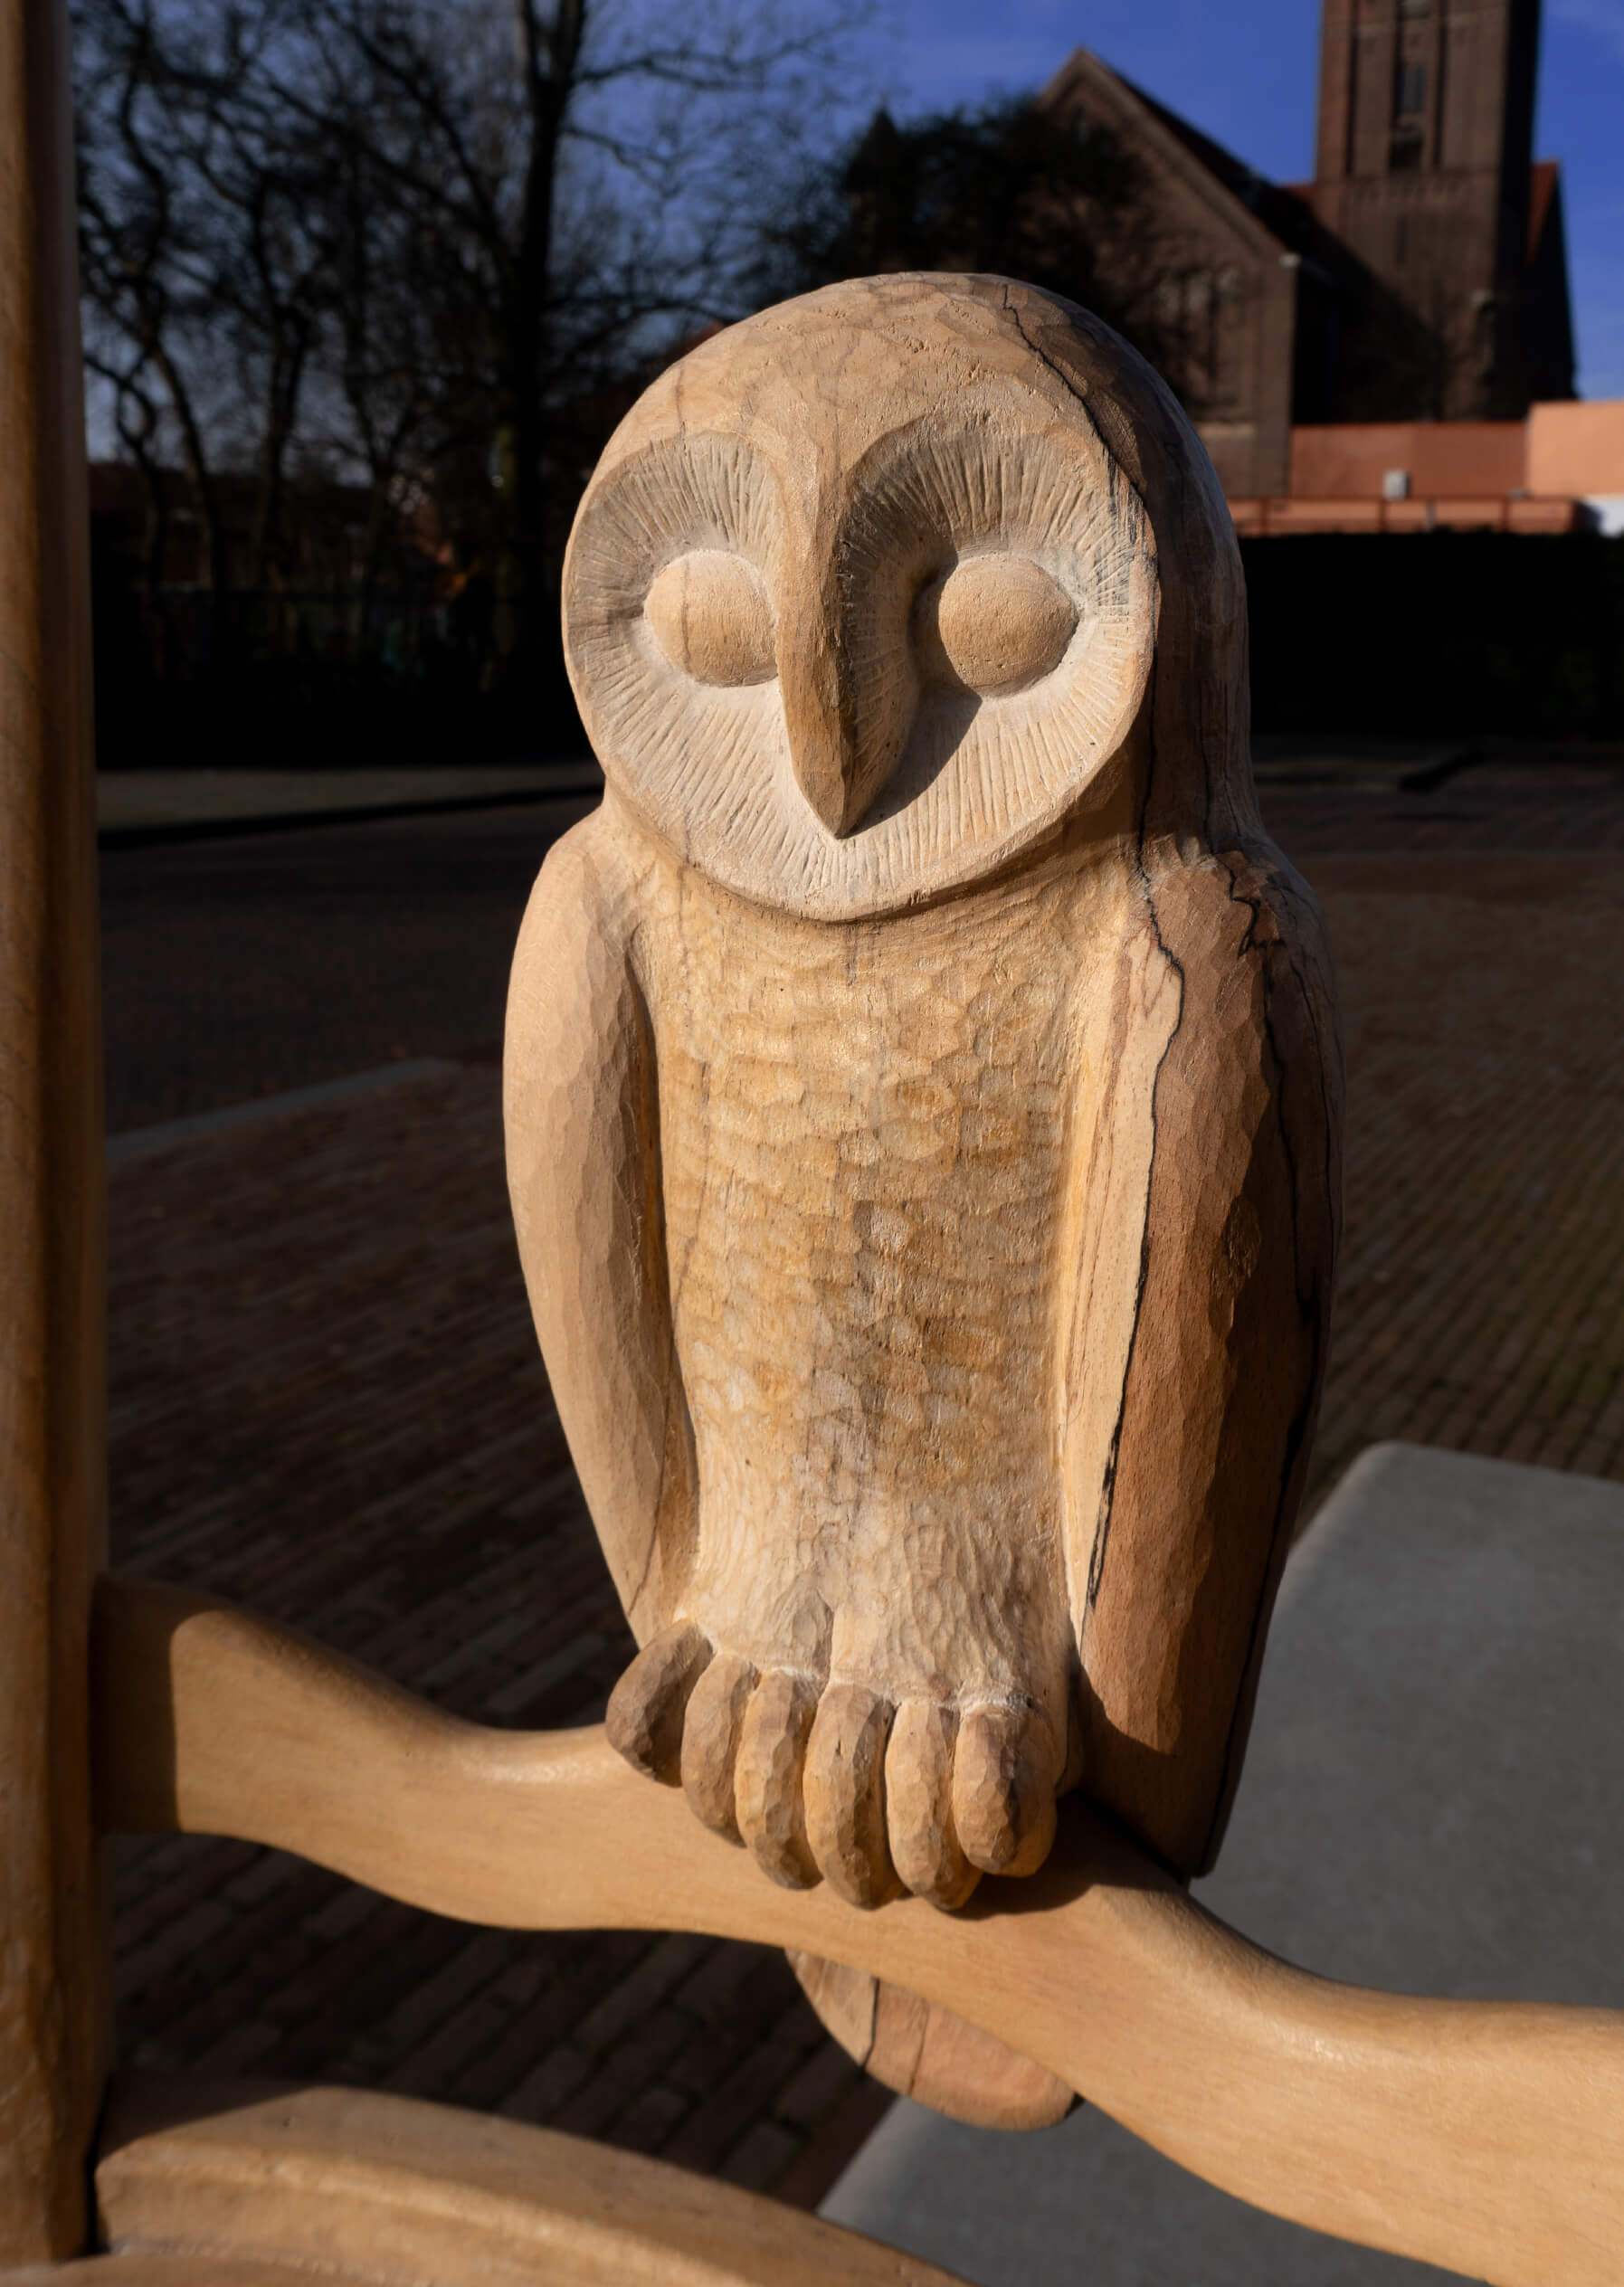 Detail of a wood sculpture depicting a bird (owl) and a chair. The photo is taken outside with evening light.